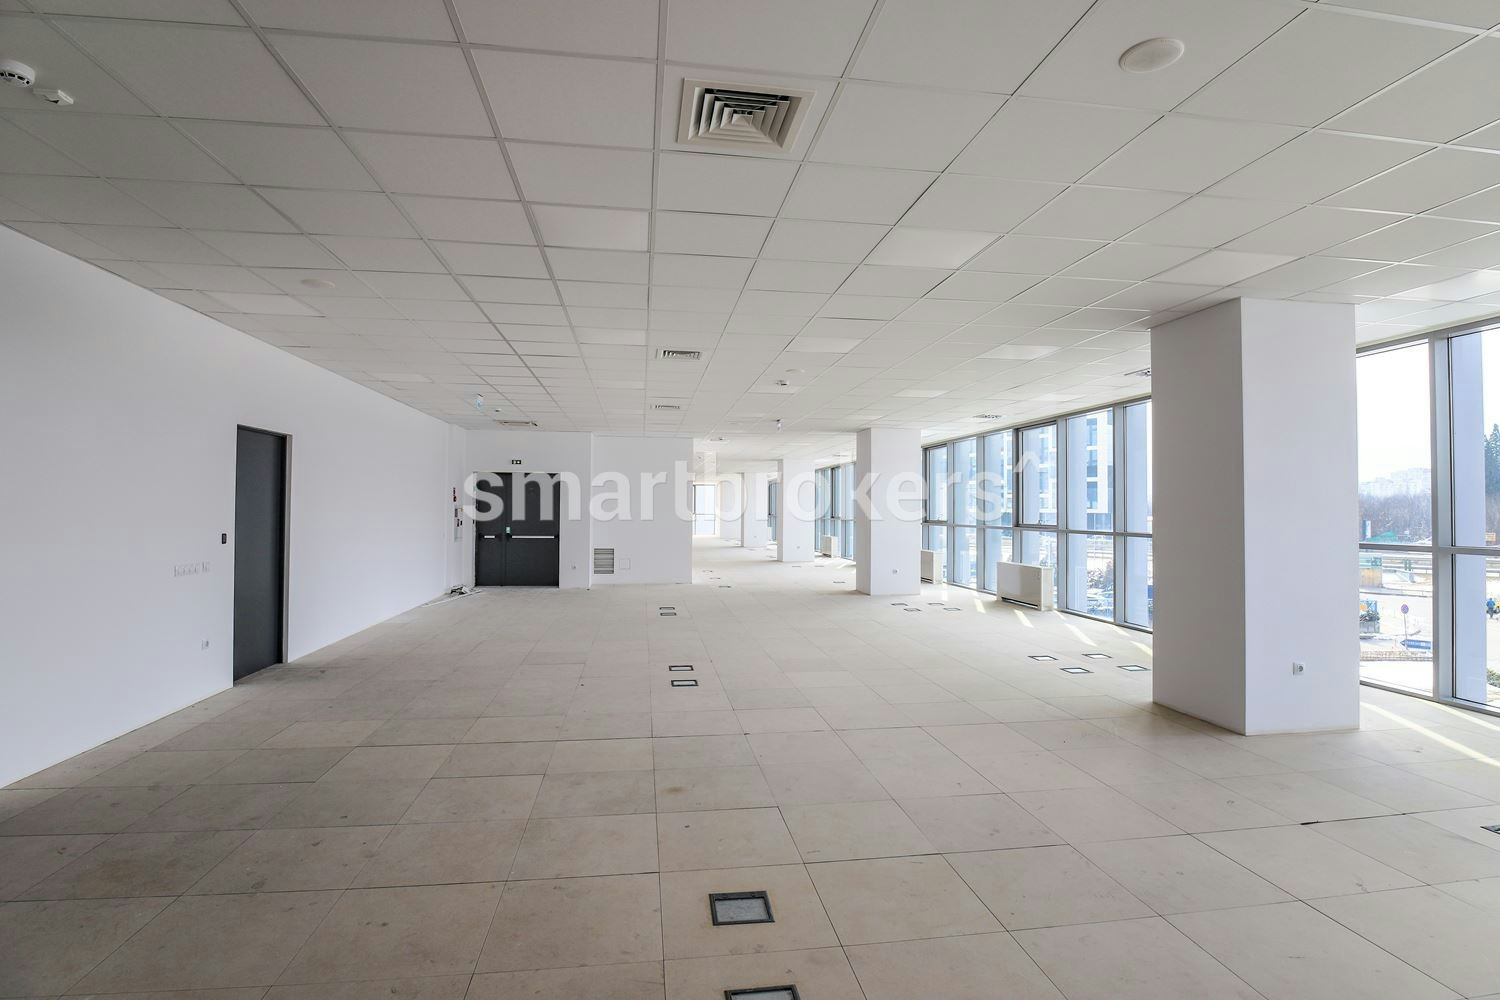 Office space for rent in a sustainable and comfortable building Sofia Office Center located on Tsarigradsko Shosse Blvd.